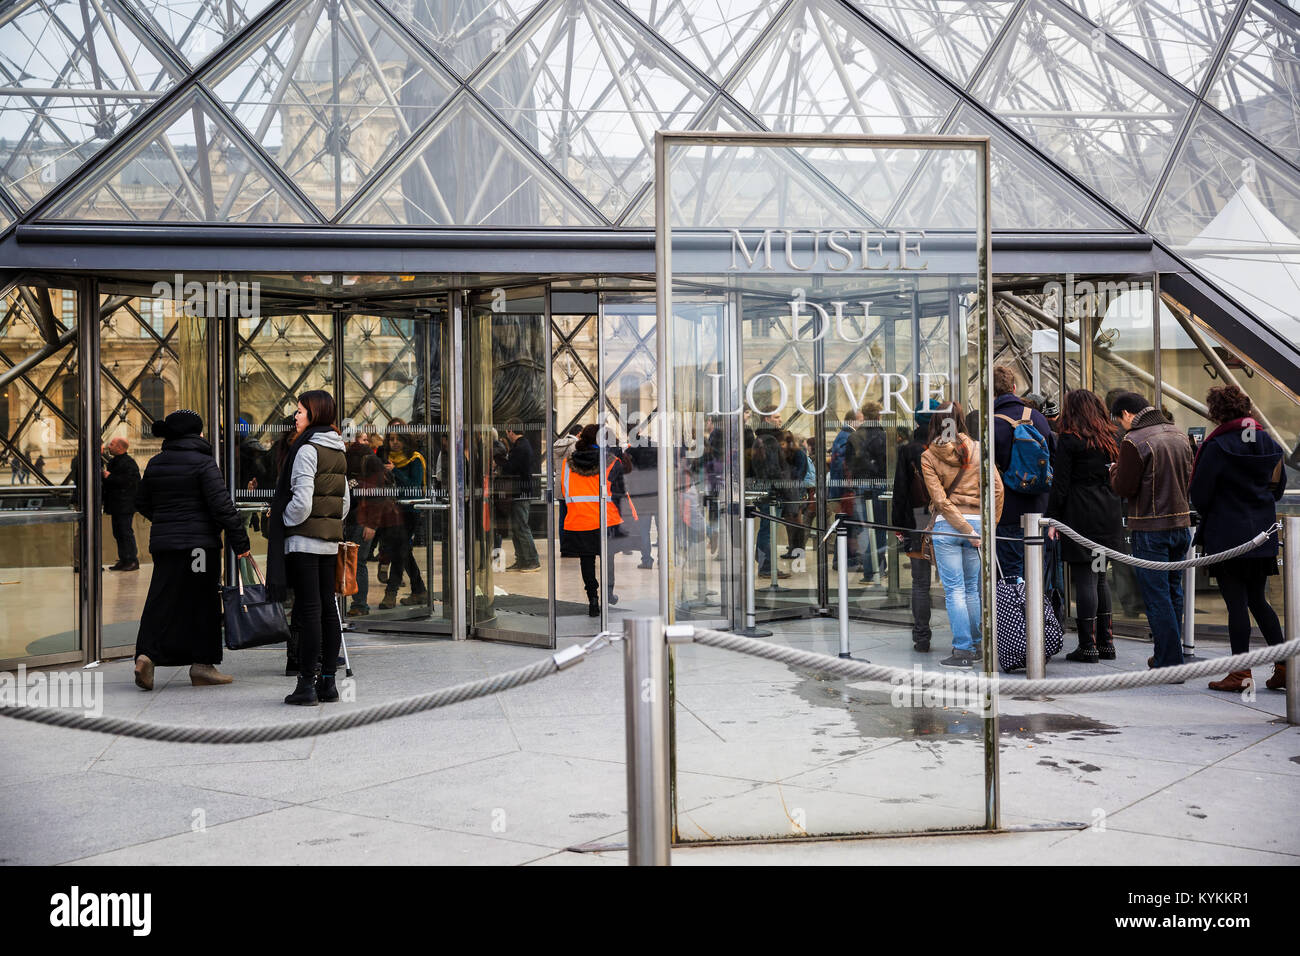 PARIS, FRANCE - JAN 5, 2014: Visitors line up at the glass entrance to the Louvre Museum. The vast museum is among the most famous in the world. Stock Photo